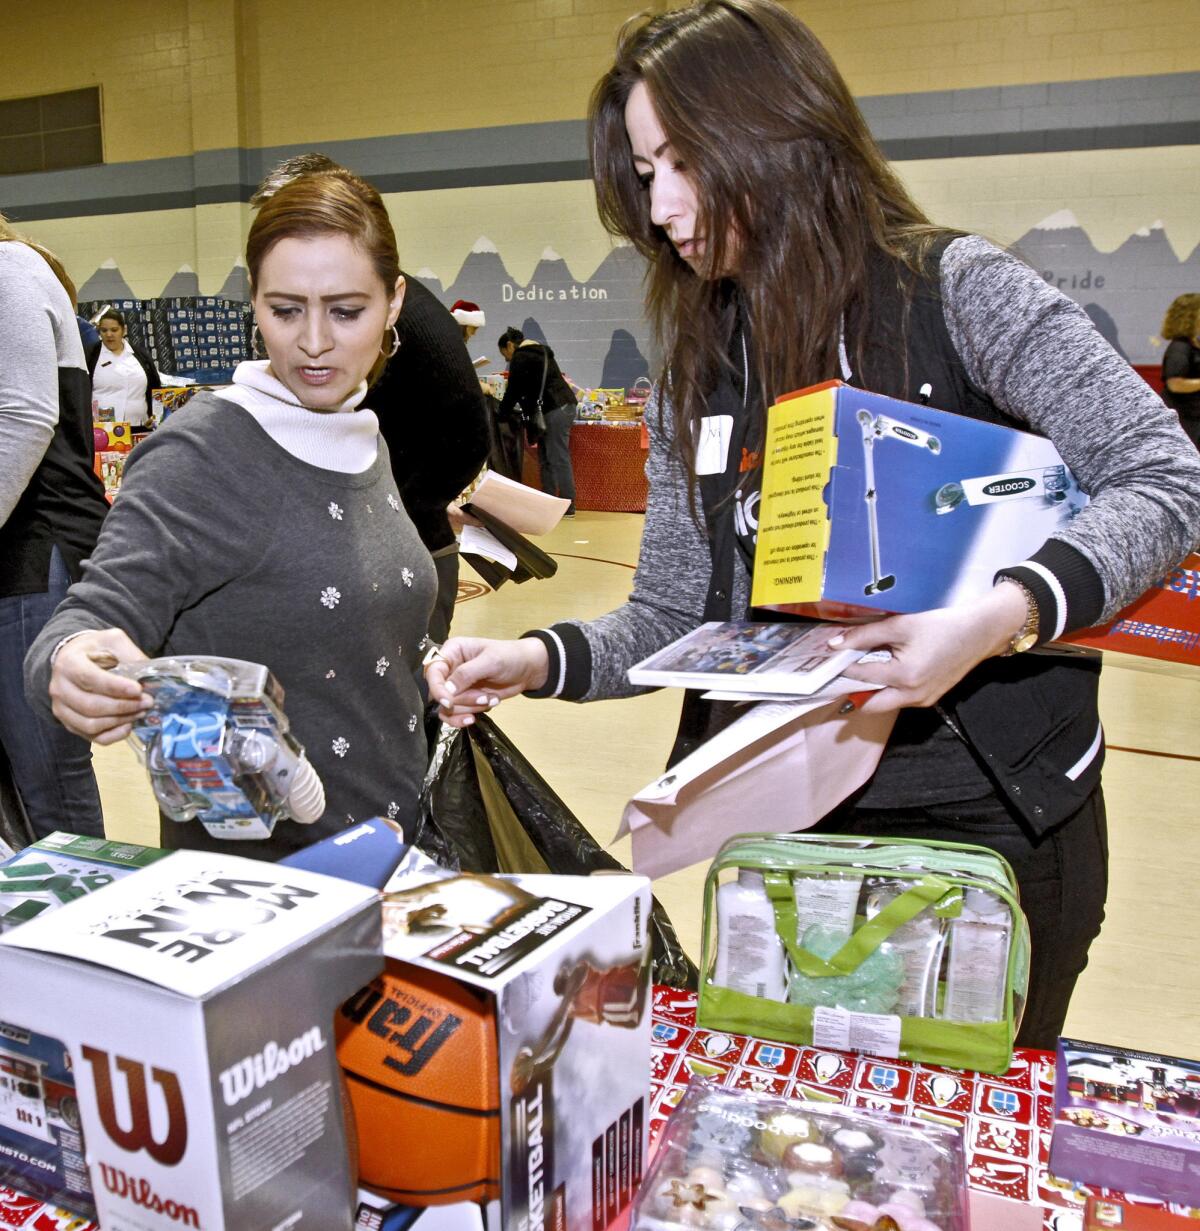 With the help of volunteer Victoria Wells, right, Rosario Ramirez, left, chooses games for her children during the Glendale Salvation Army toy distribution at the Corps gym in Glendale on Thursday, Dec. 19, 2013. About 500 local families were given toys for children up to 12 years old.